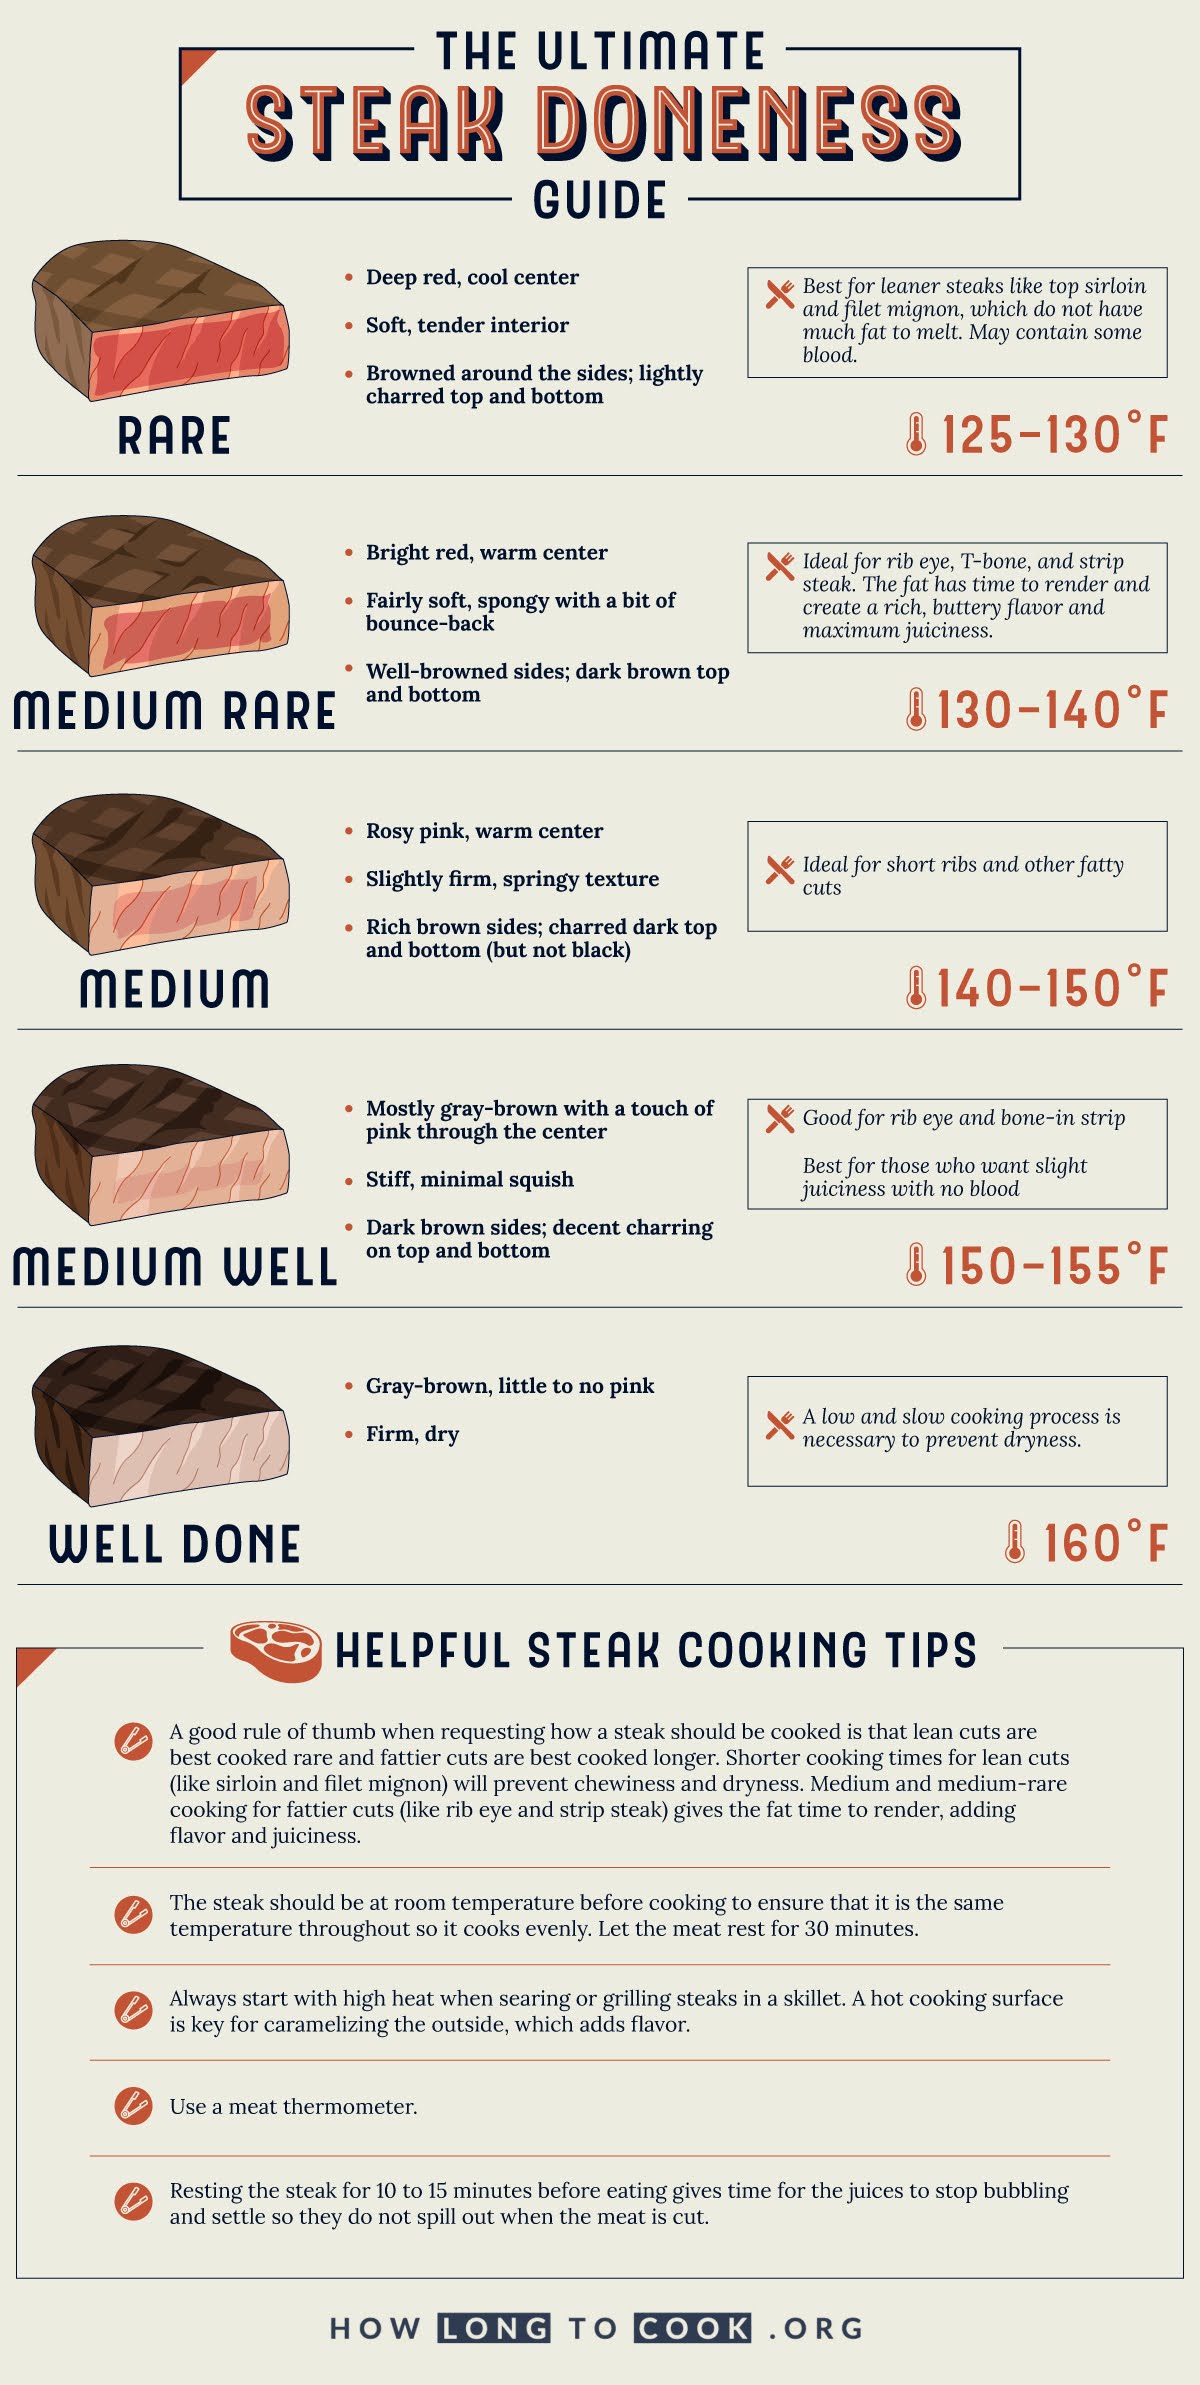 The Ultimate Steak Doneness Guide #Infographic